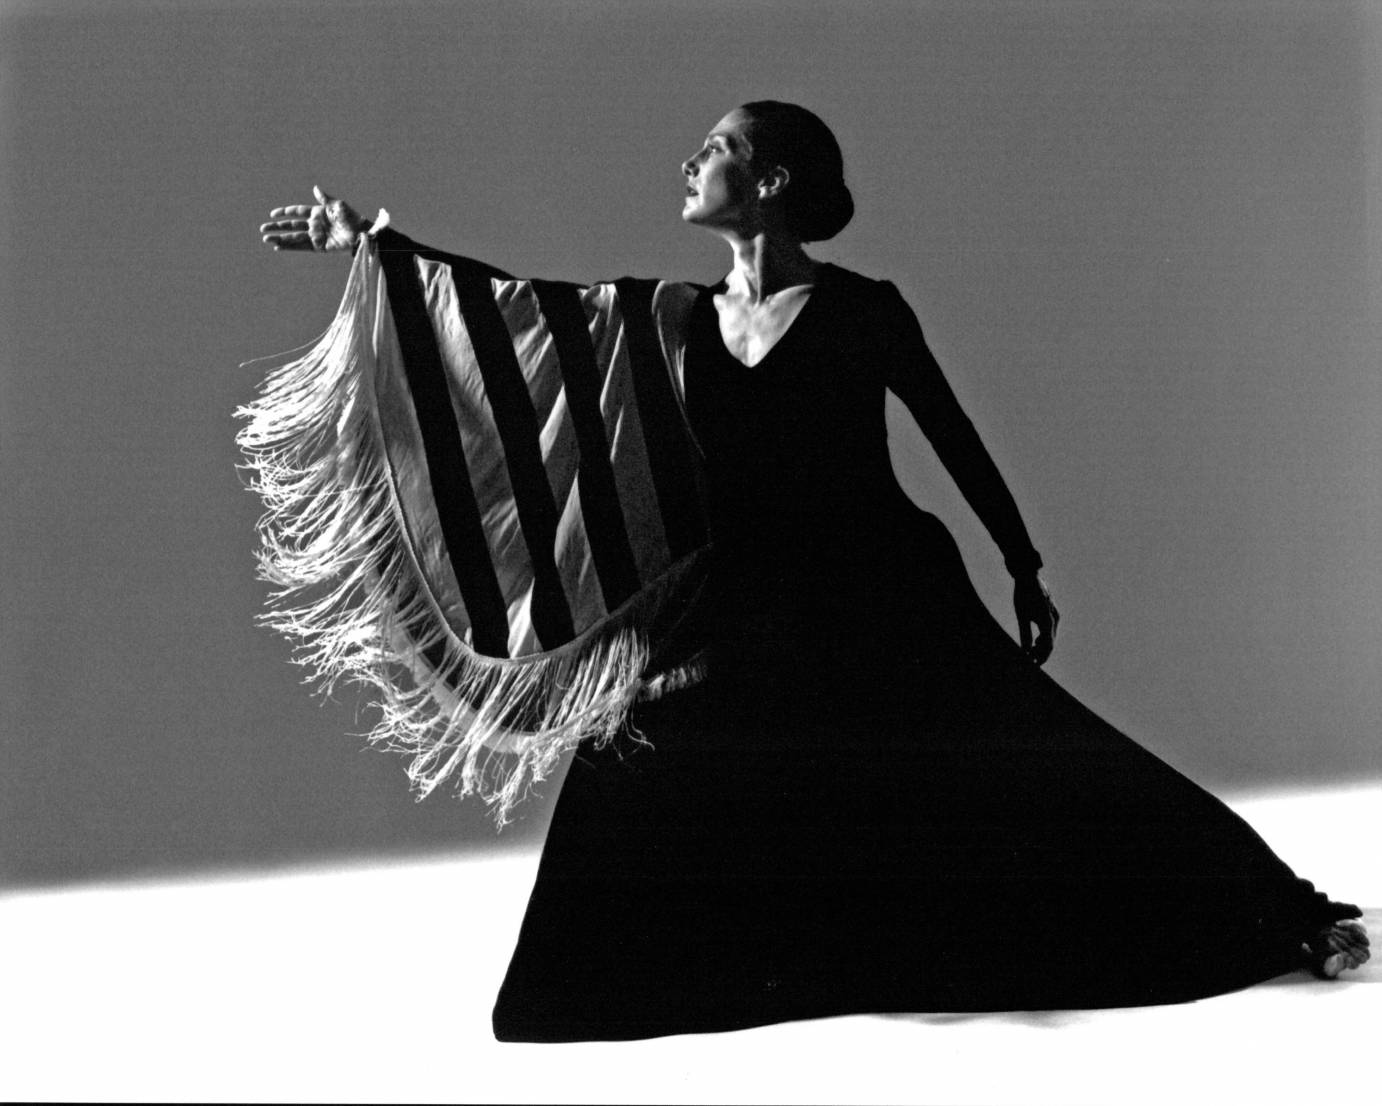 a black and white photograph of a woman in a dramatic lunging profile, her hair is in a tight bun, she wears a long black gown and a striped shawl hangs from her extended arm